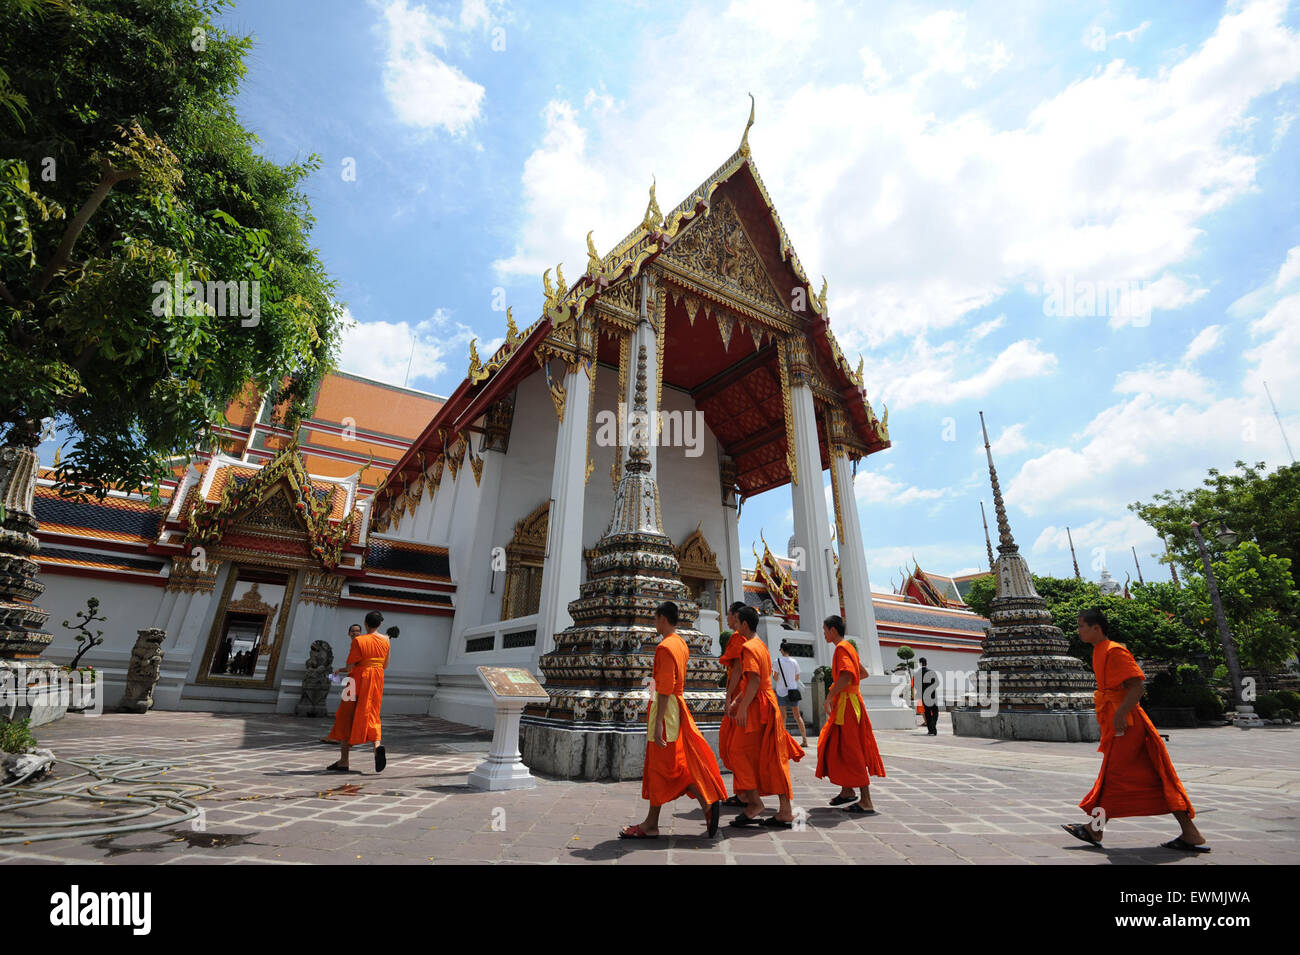 (150629) -- BANGKOK, June 29, 2015 (Xinhua) -- Monks walk at the Wat Pho Temple in Bangkok, Thailand, June 29, 2015. The number of tourists visiting Thailand reached more than 12.4 million between January and May this year, up 24.72 percent year on year, the Tourism Authority of Thailand (TAT) said on June 24. (Xinhua/Rachen Sageamsak) Stock Photo